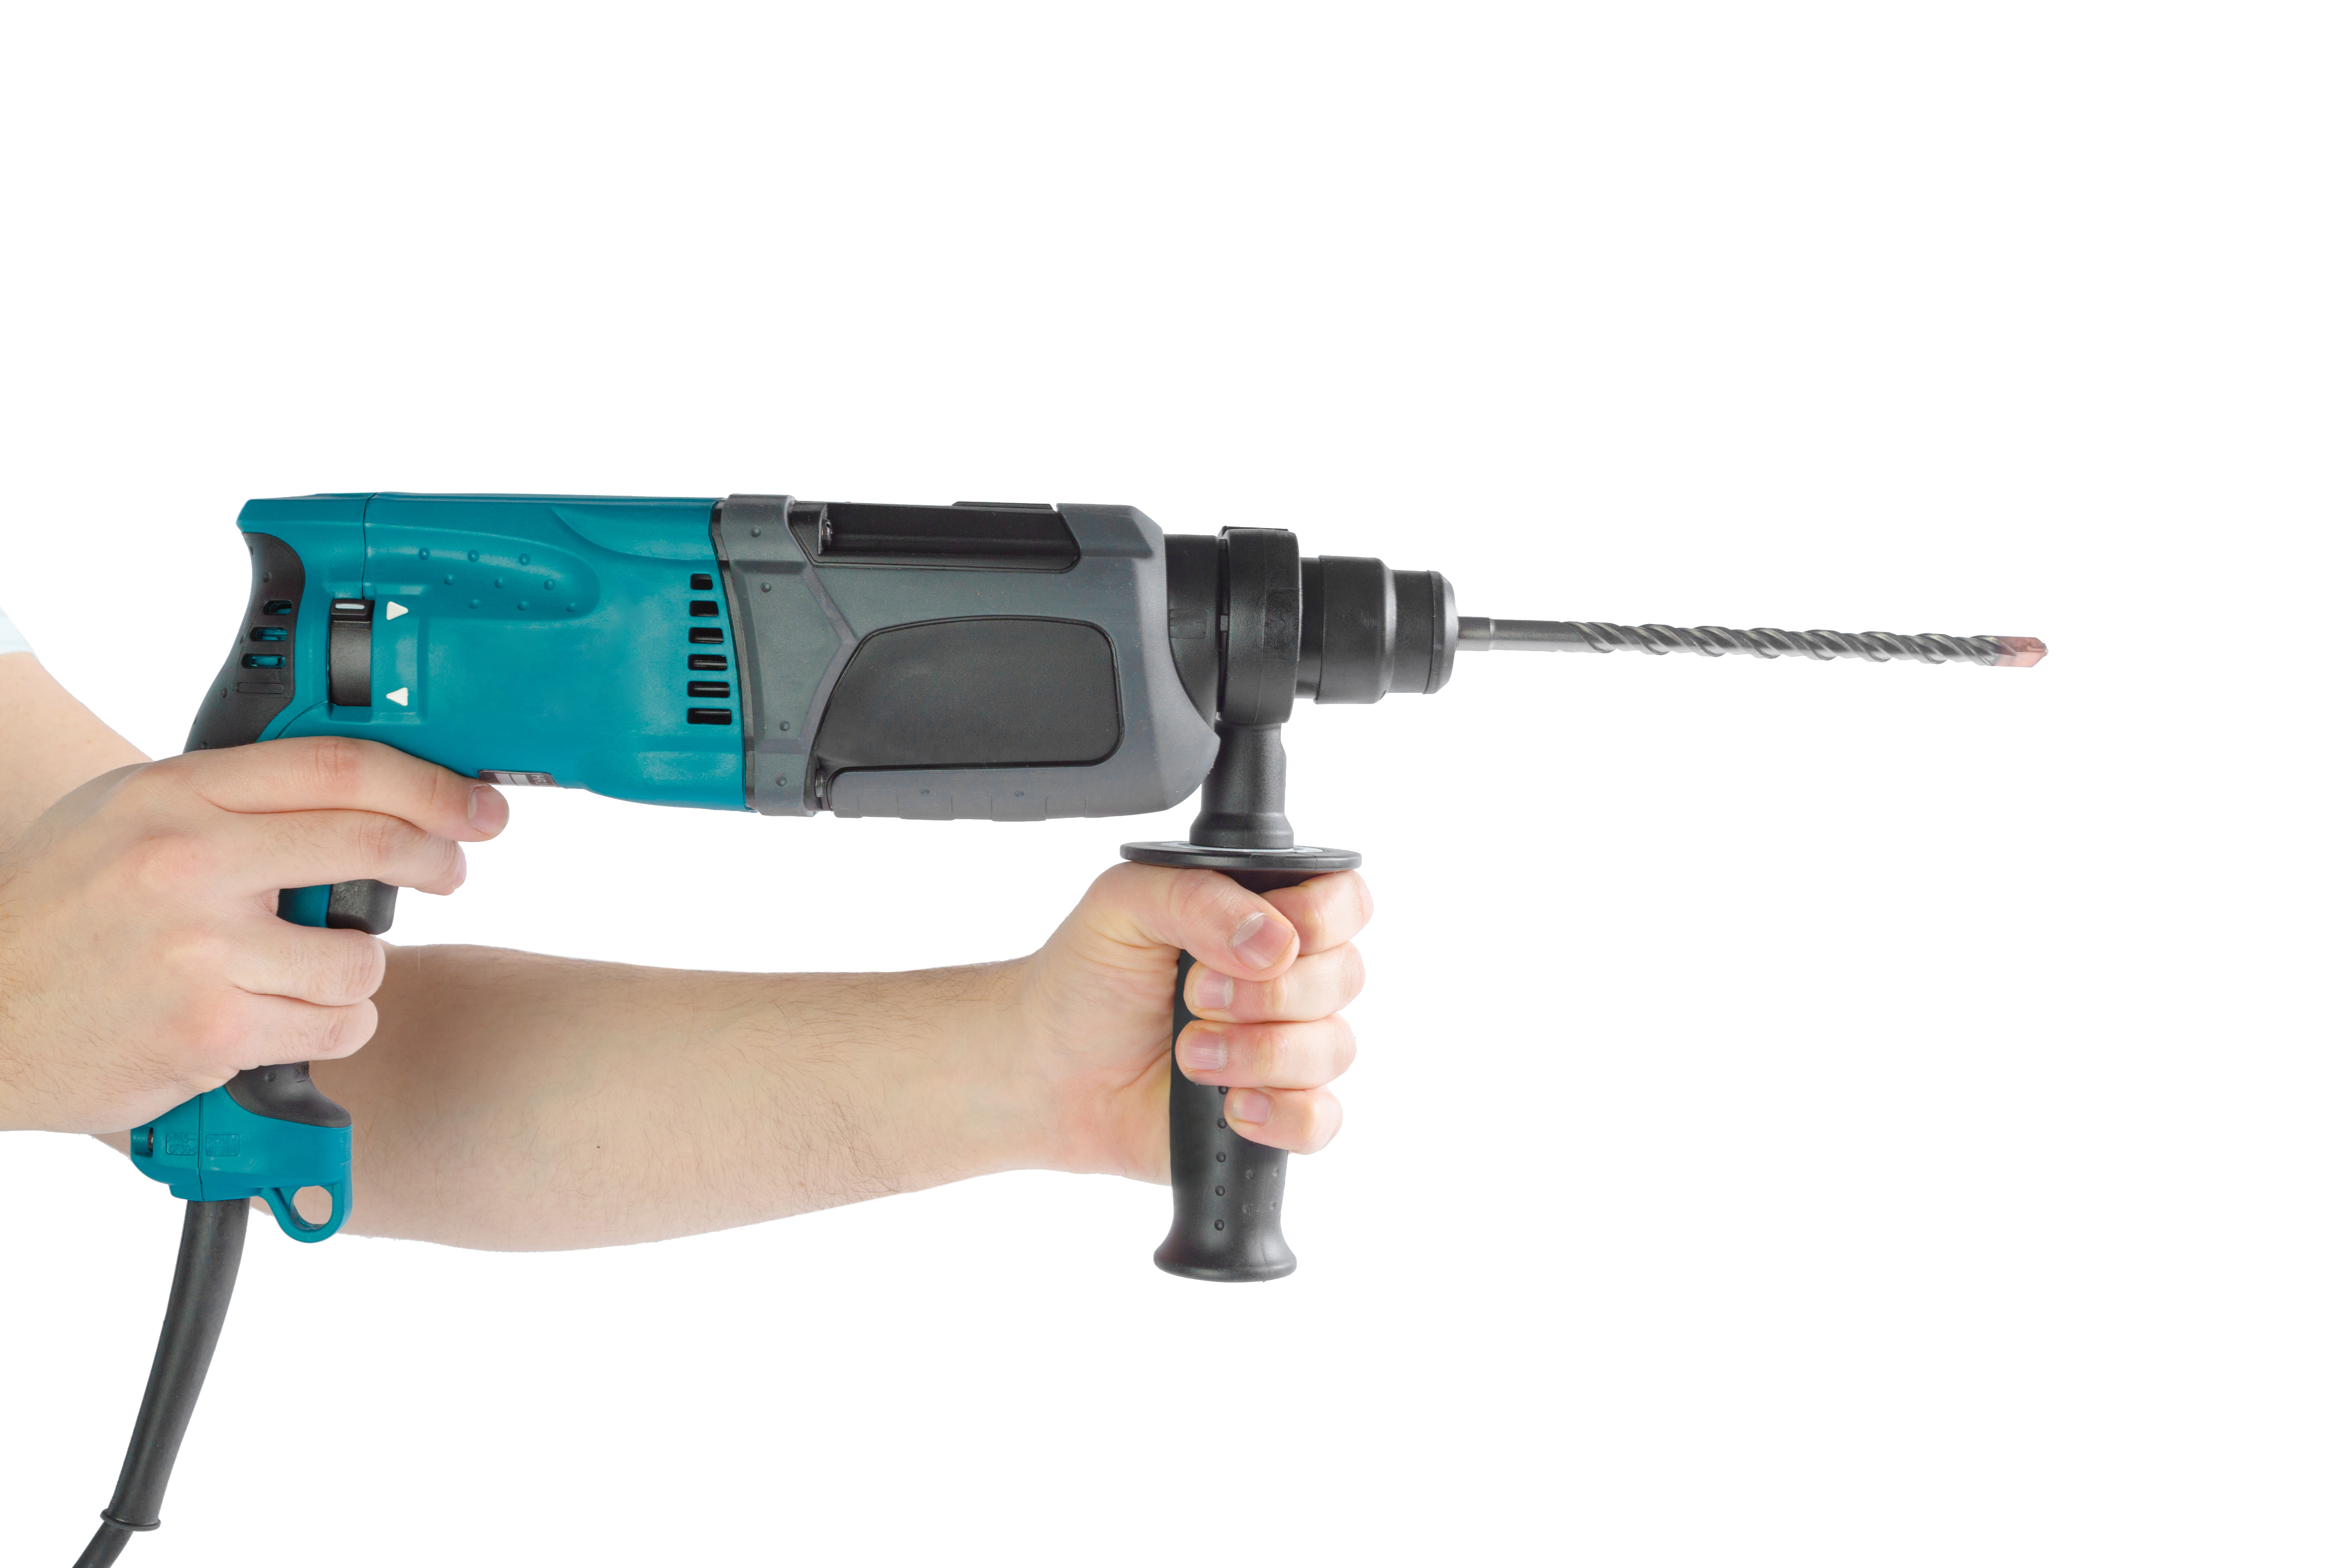 Man using a hammer drill to drill into a wall